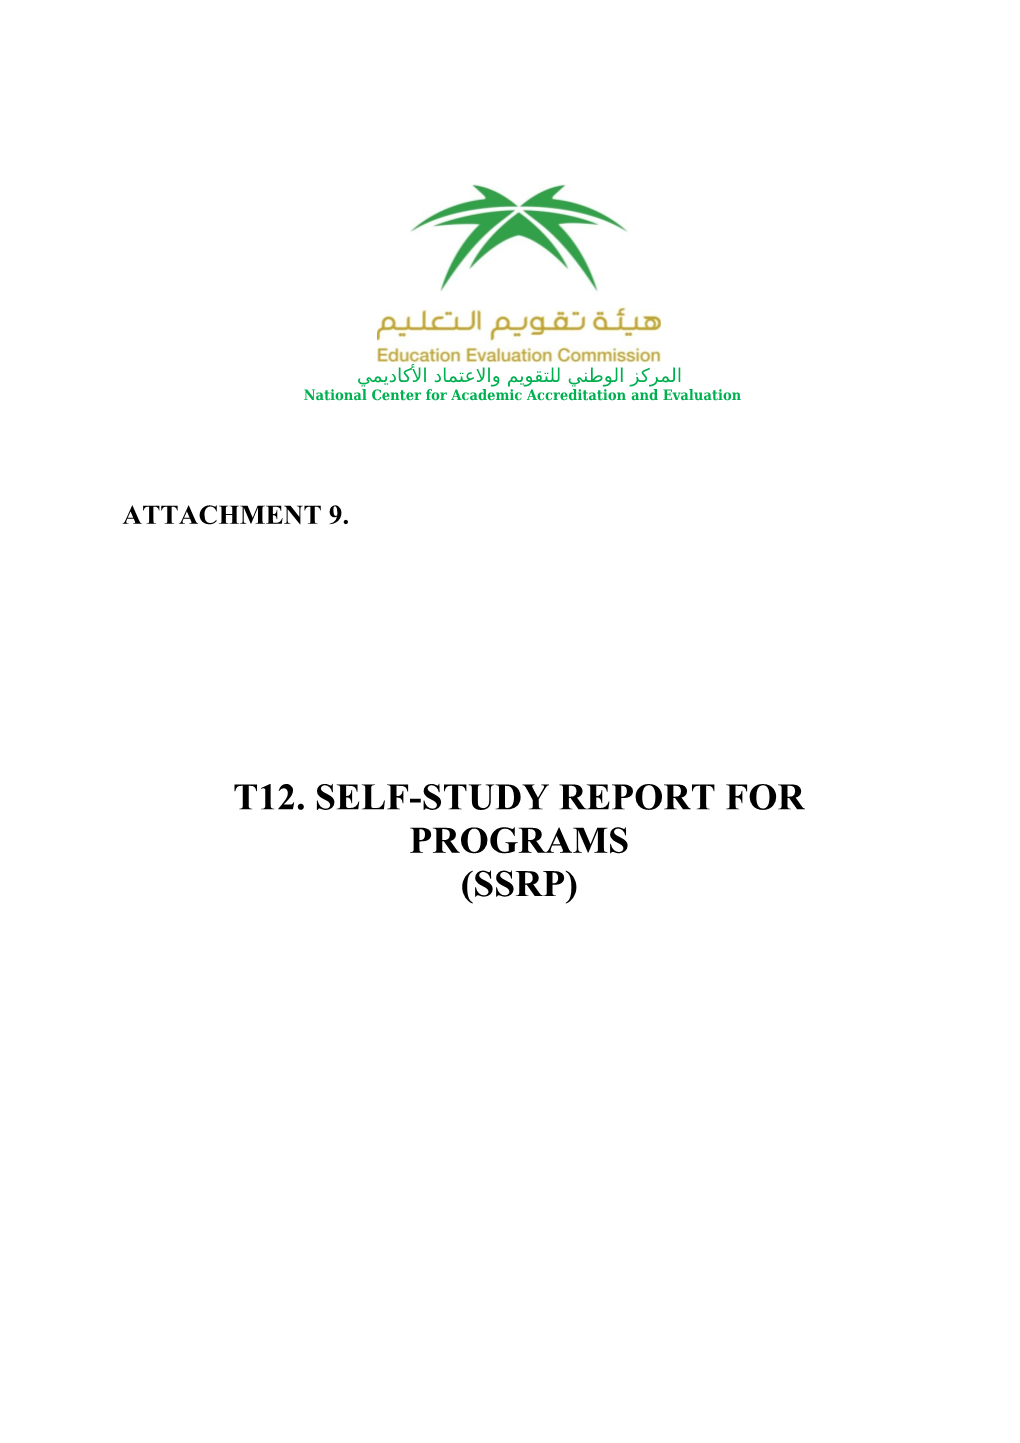 T12 Self-Study Report for Programs 10 6 2017